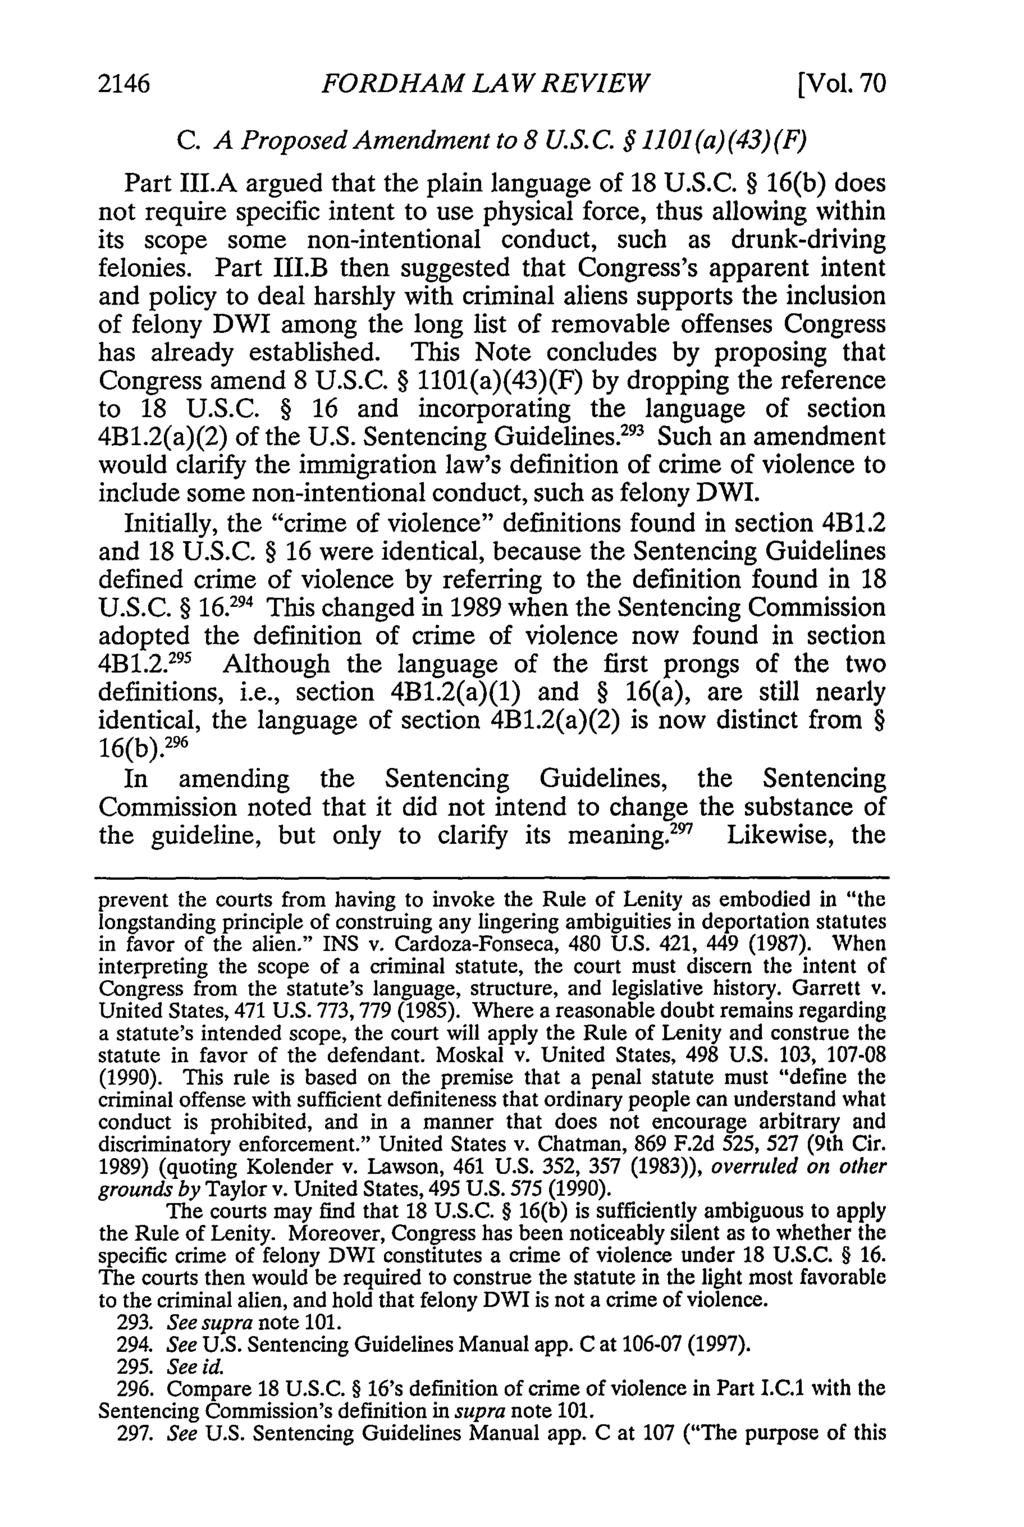 2146 FORDHAM LAW REVIEW [Vol. 70 C. A Proposed Amendment to 8 U.S.C. 1101 (a) (43) (F) Part III.A argued that the plain language of 18 U.S.C. 16(b) does not require specific intent to use physical force, thus allowing within its scope some non-intentional conduct, such as drunk-driving felonies.